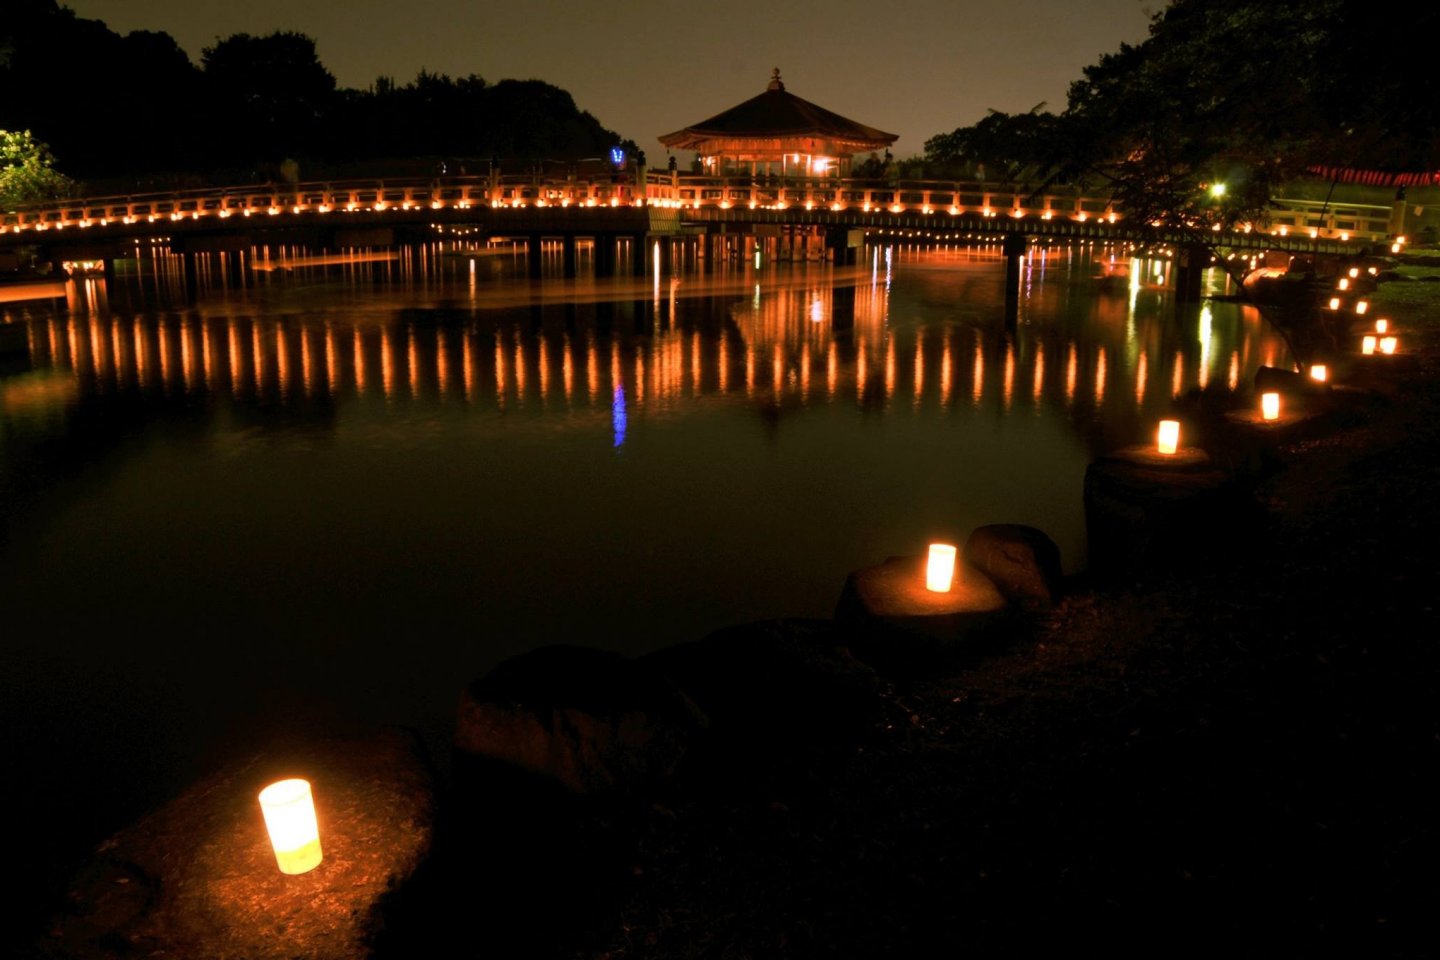 Lanterns from the Tokae and boats reflected in a pond in Nara Park